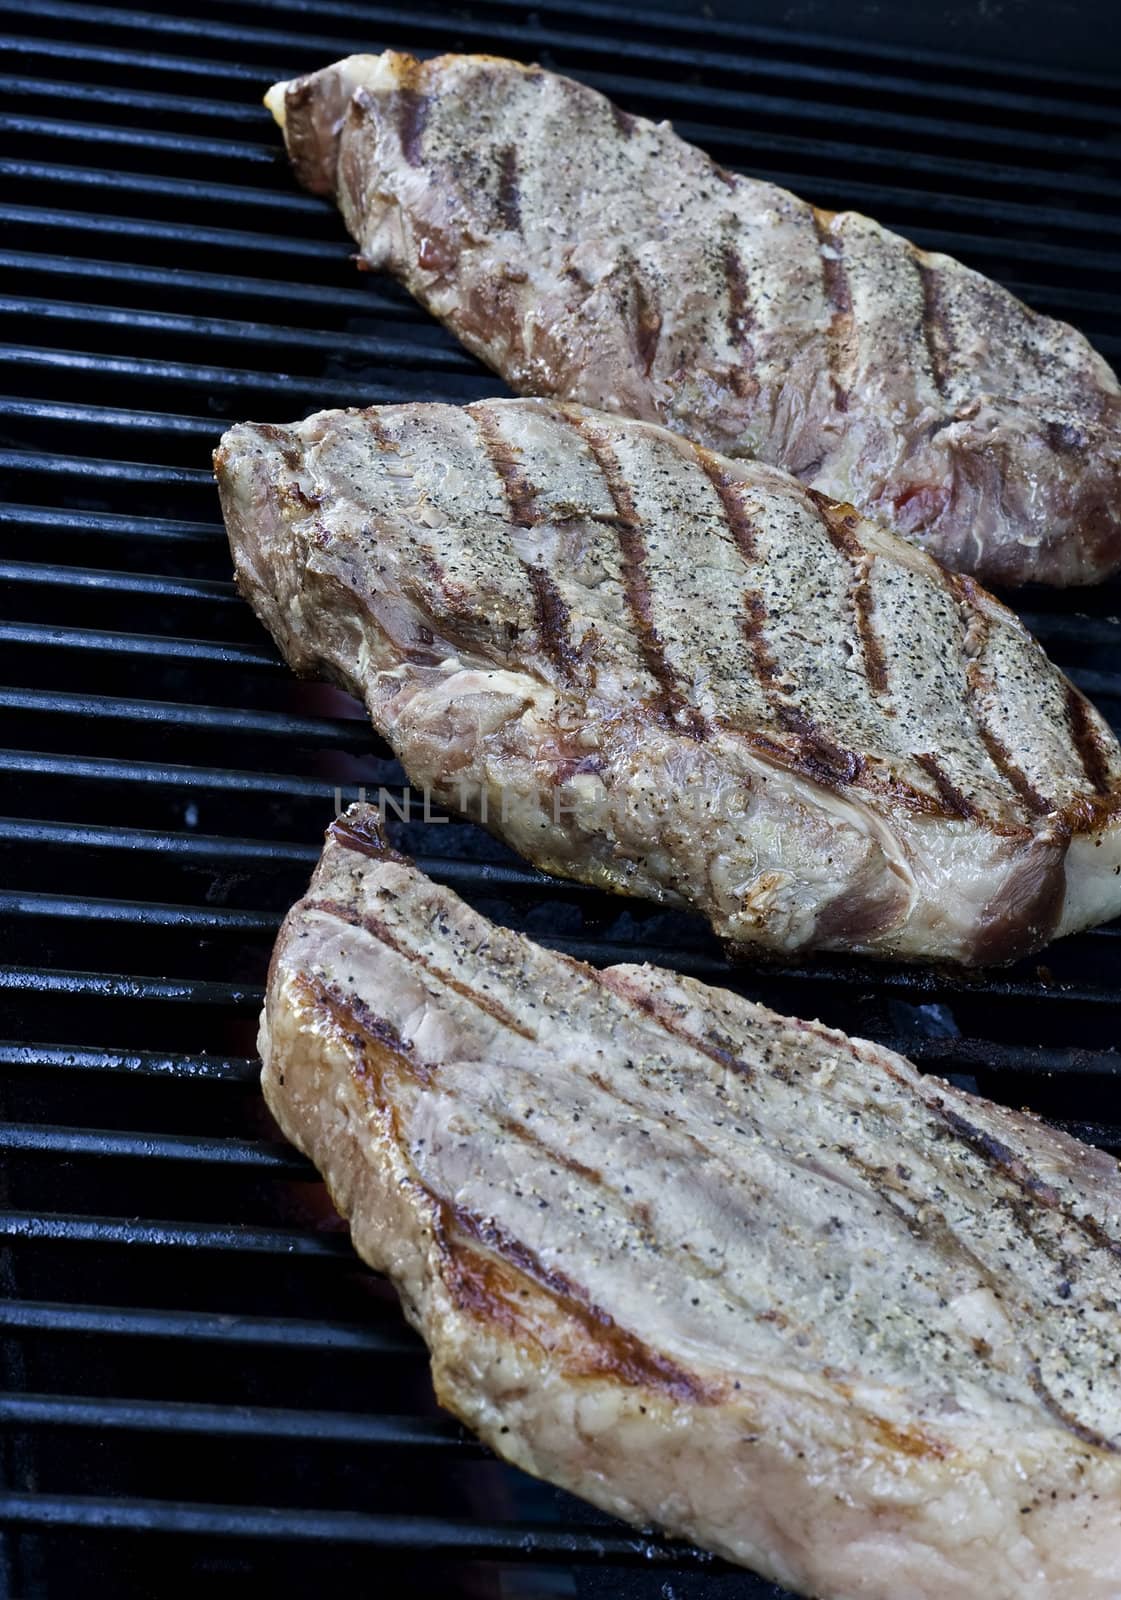 Grilling steaks on the grill nice cuts of meat close up shot shallow DOF